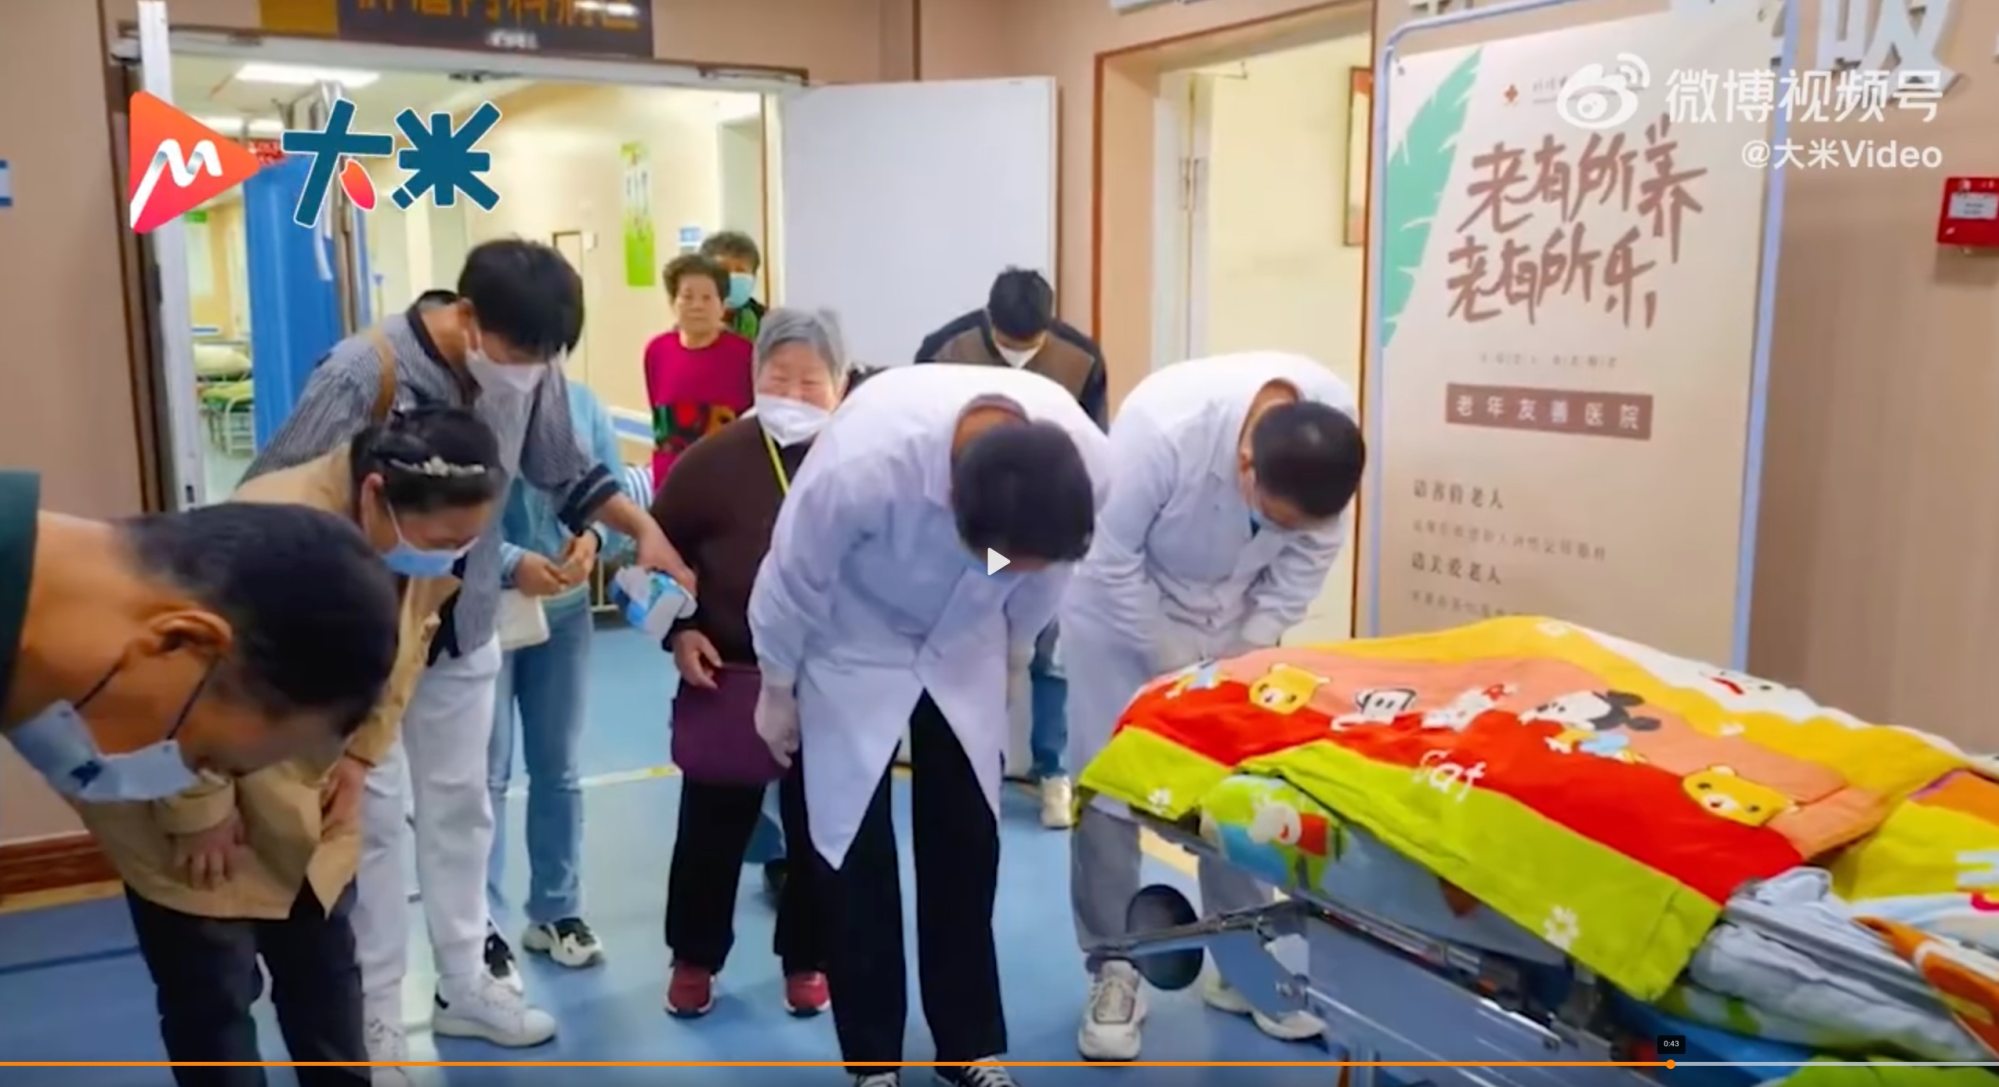 Hospital staff bow as a mark of respect towards Meng and in gratitude for the selfless donation of her body after death. Photo: Weibo